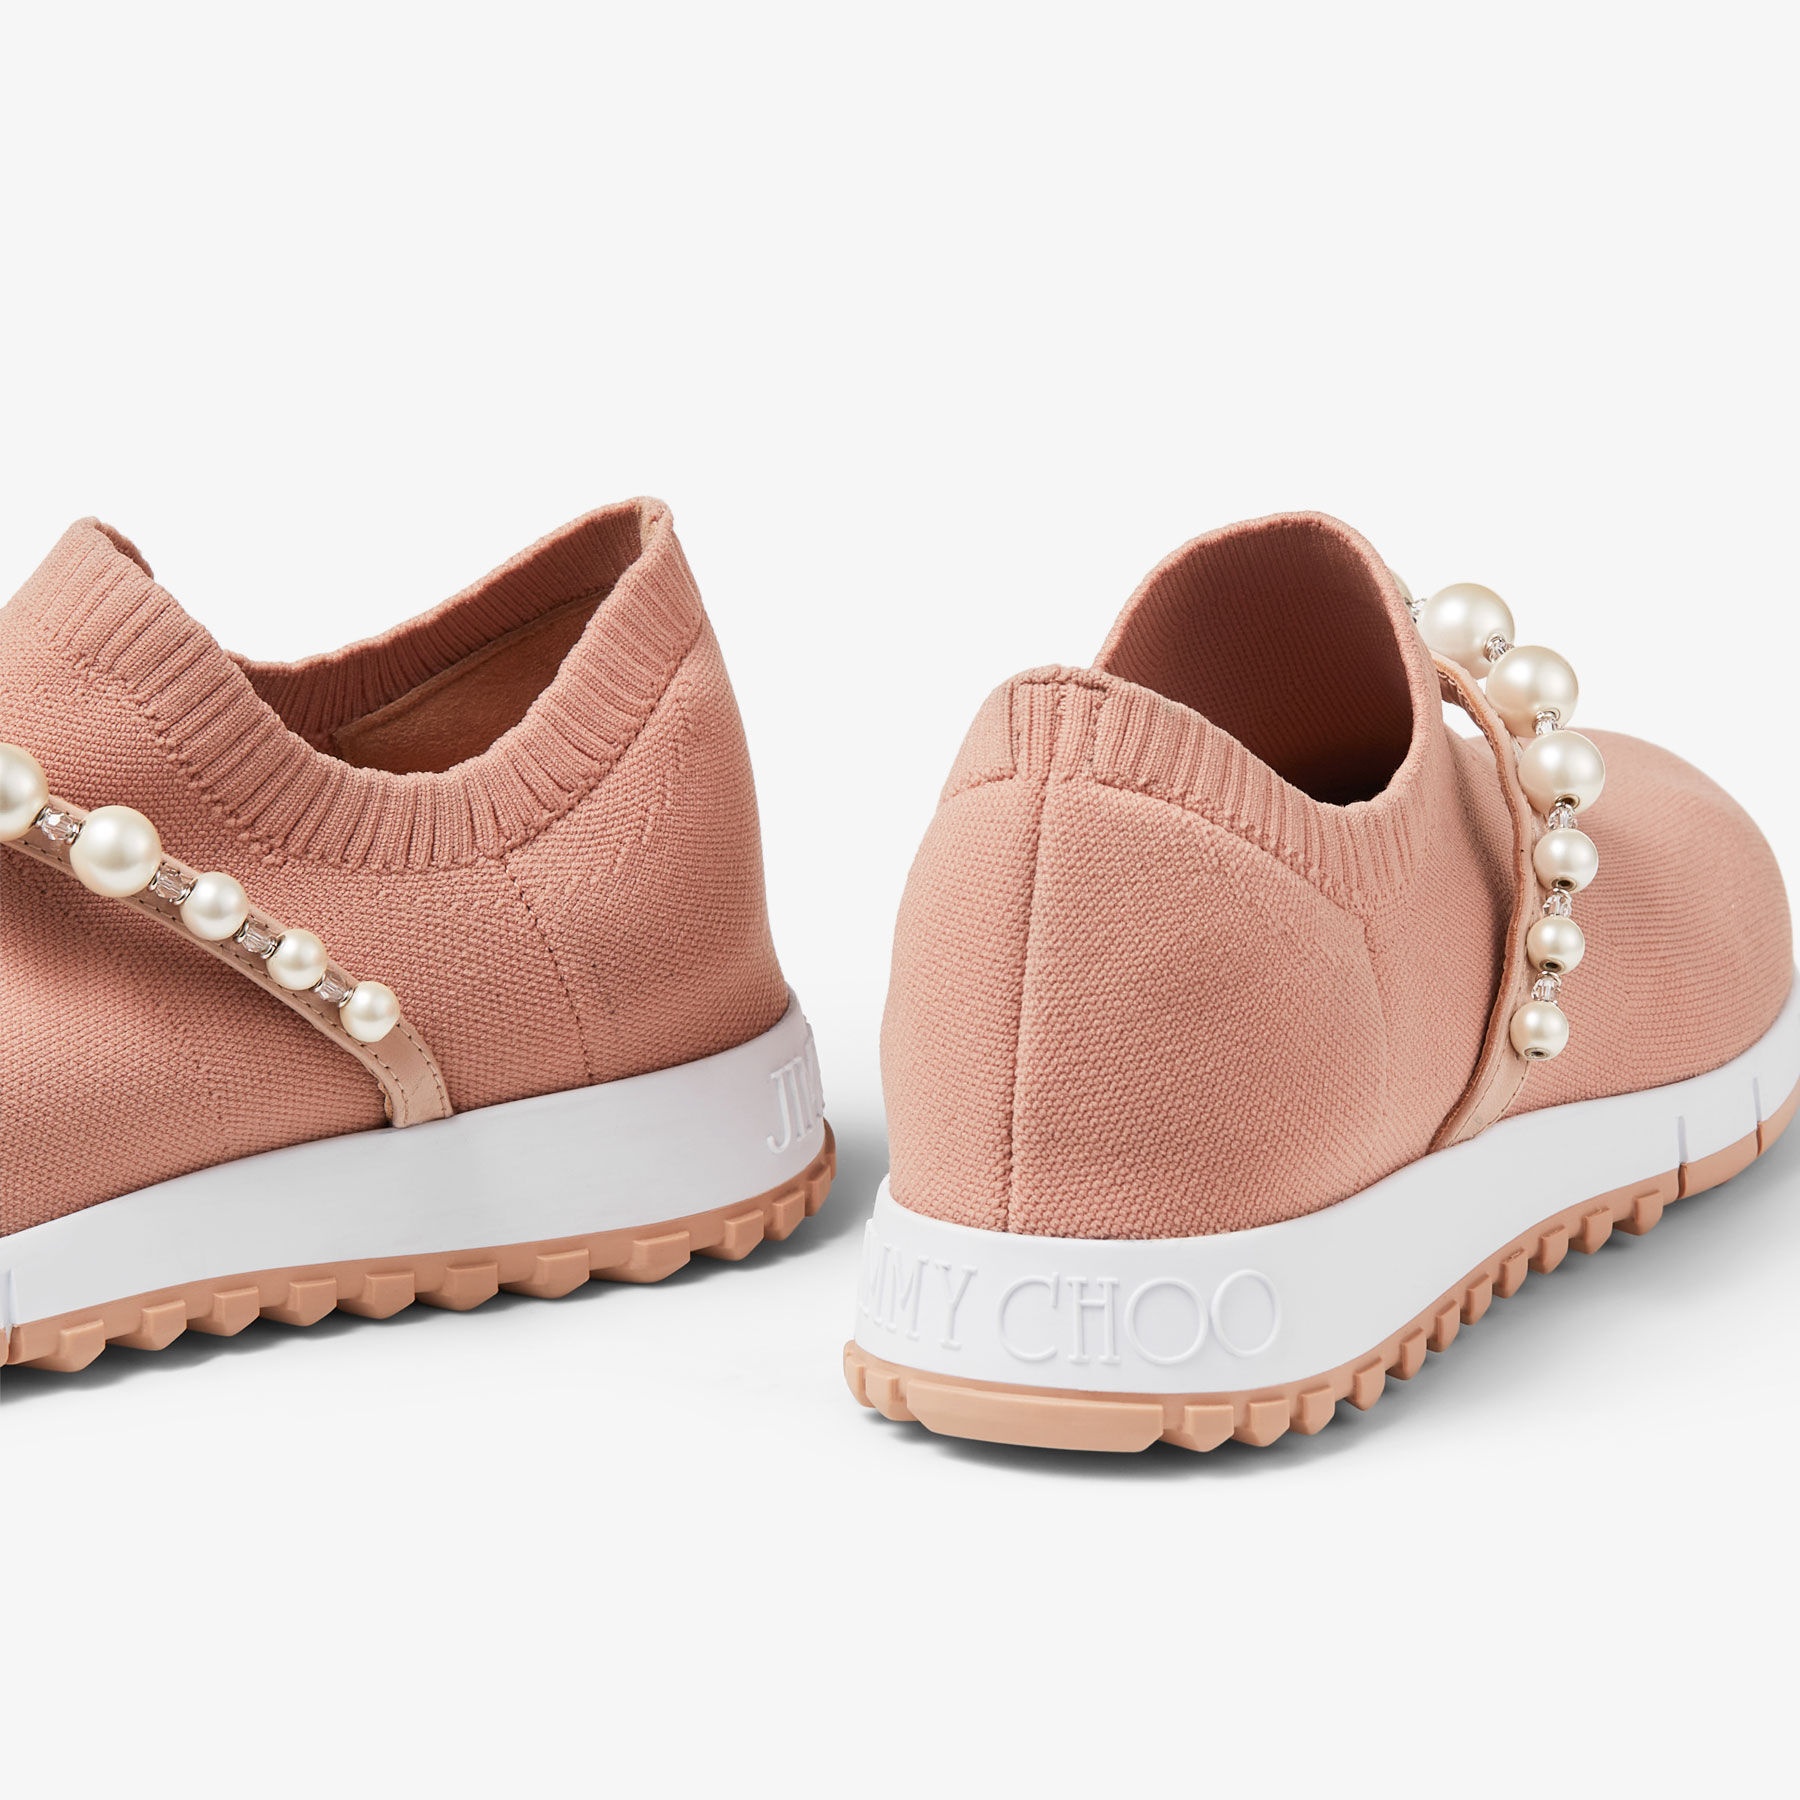 Venice
Ballet Pink Knit Trainers with Pearls - 4